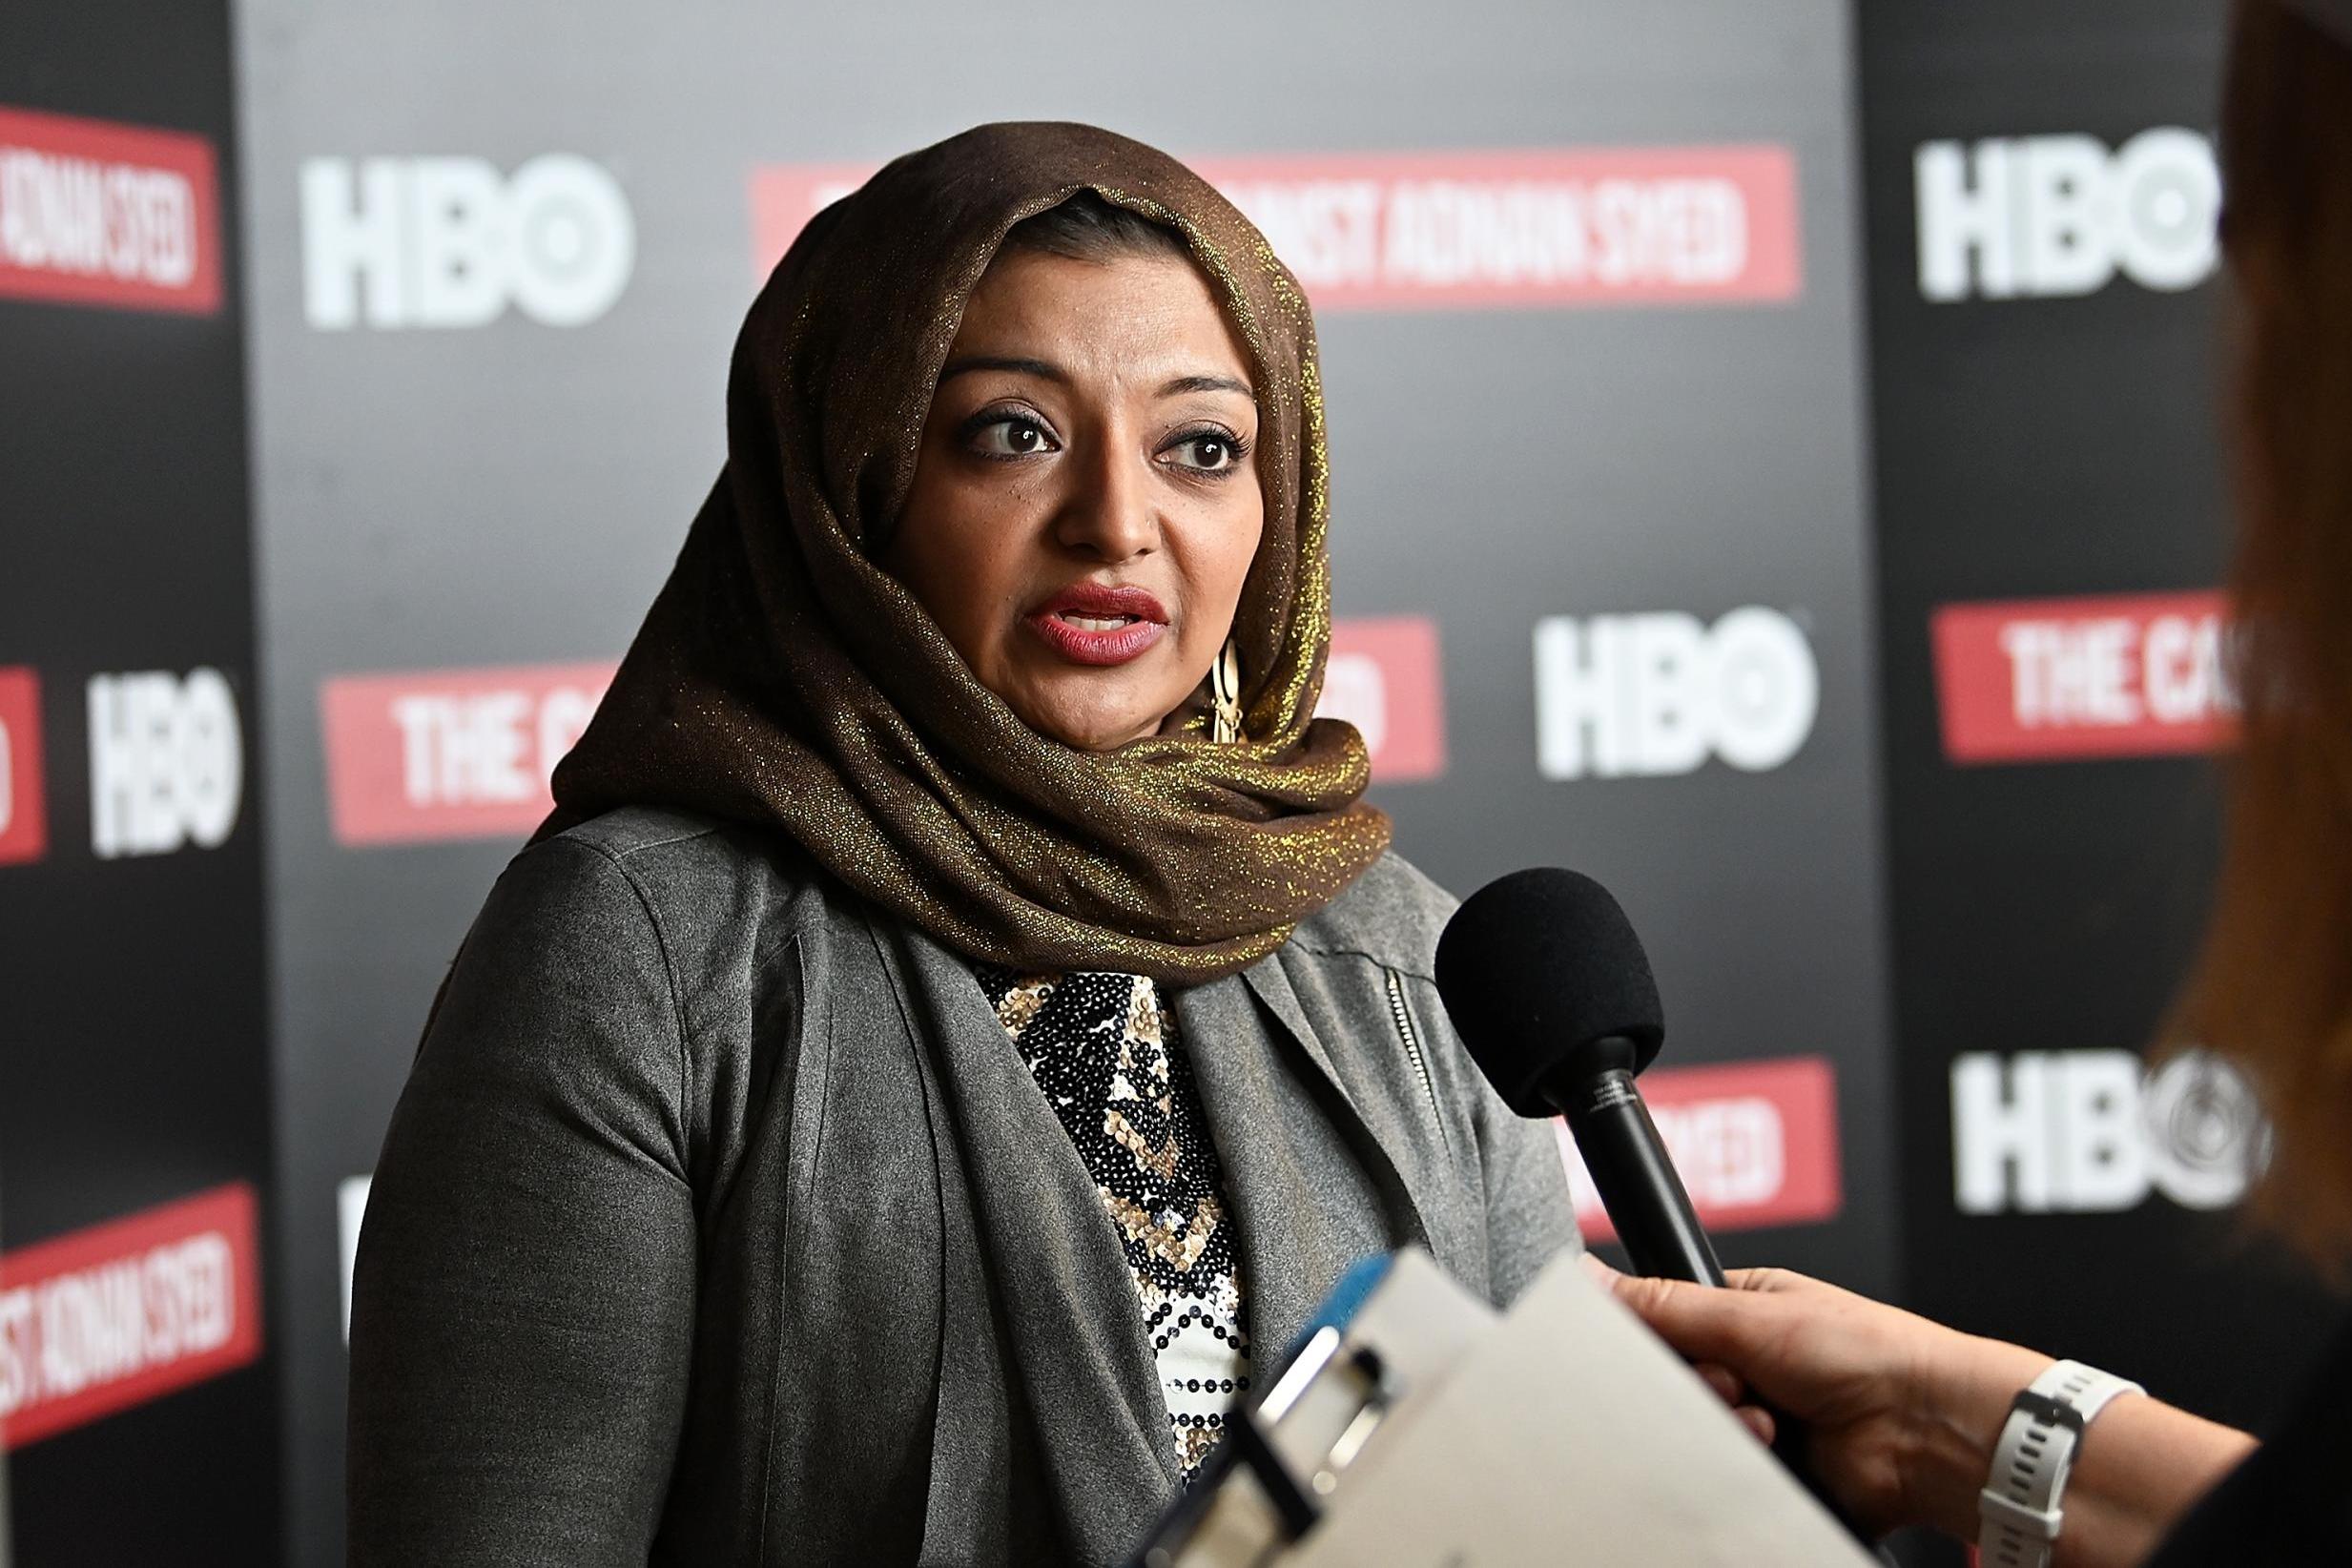 Rabia Chaudry, who introduced Koenig to Adnan’s case, is convinced of his innocence